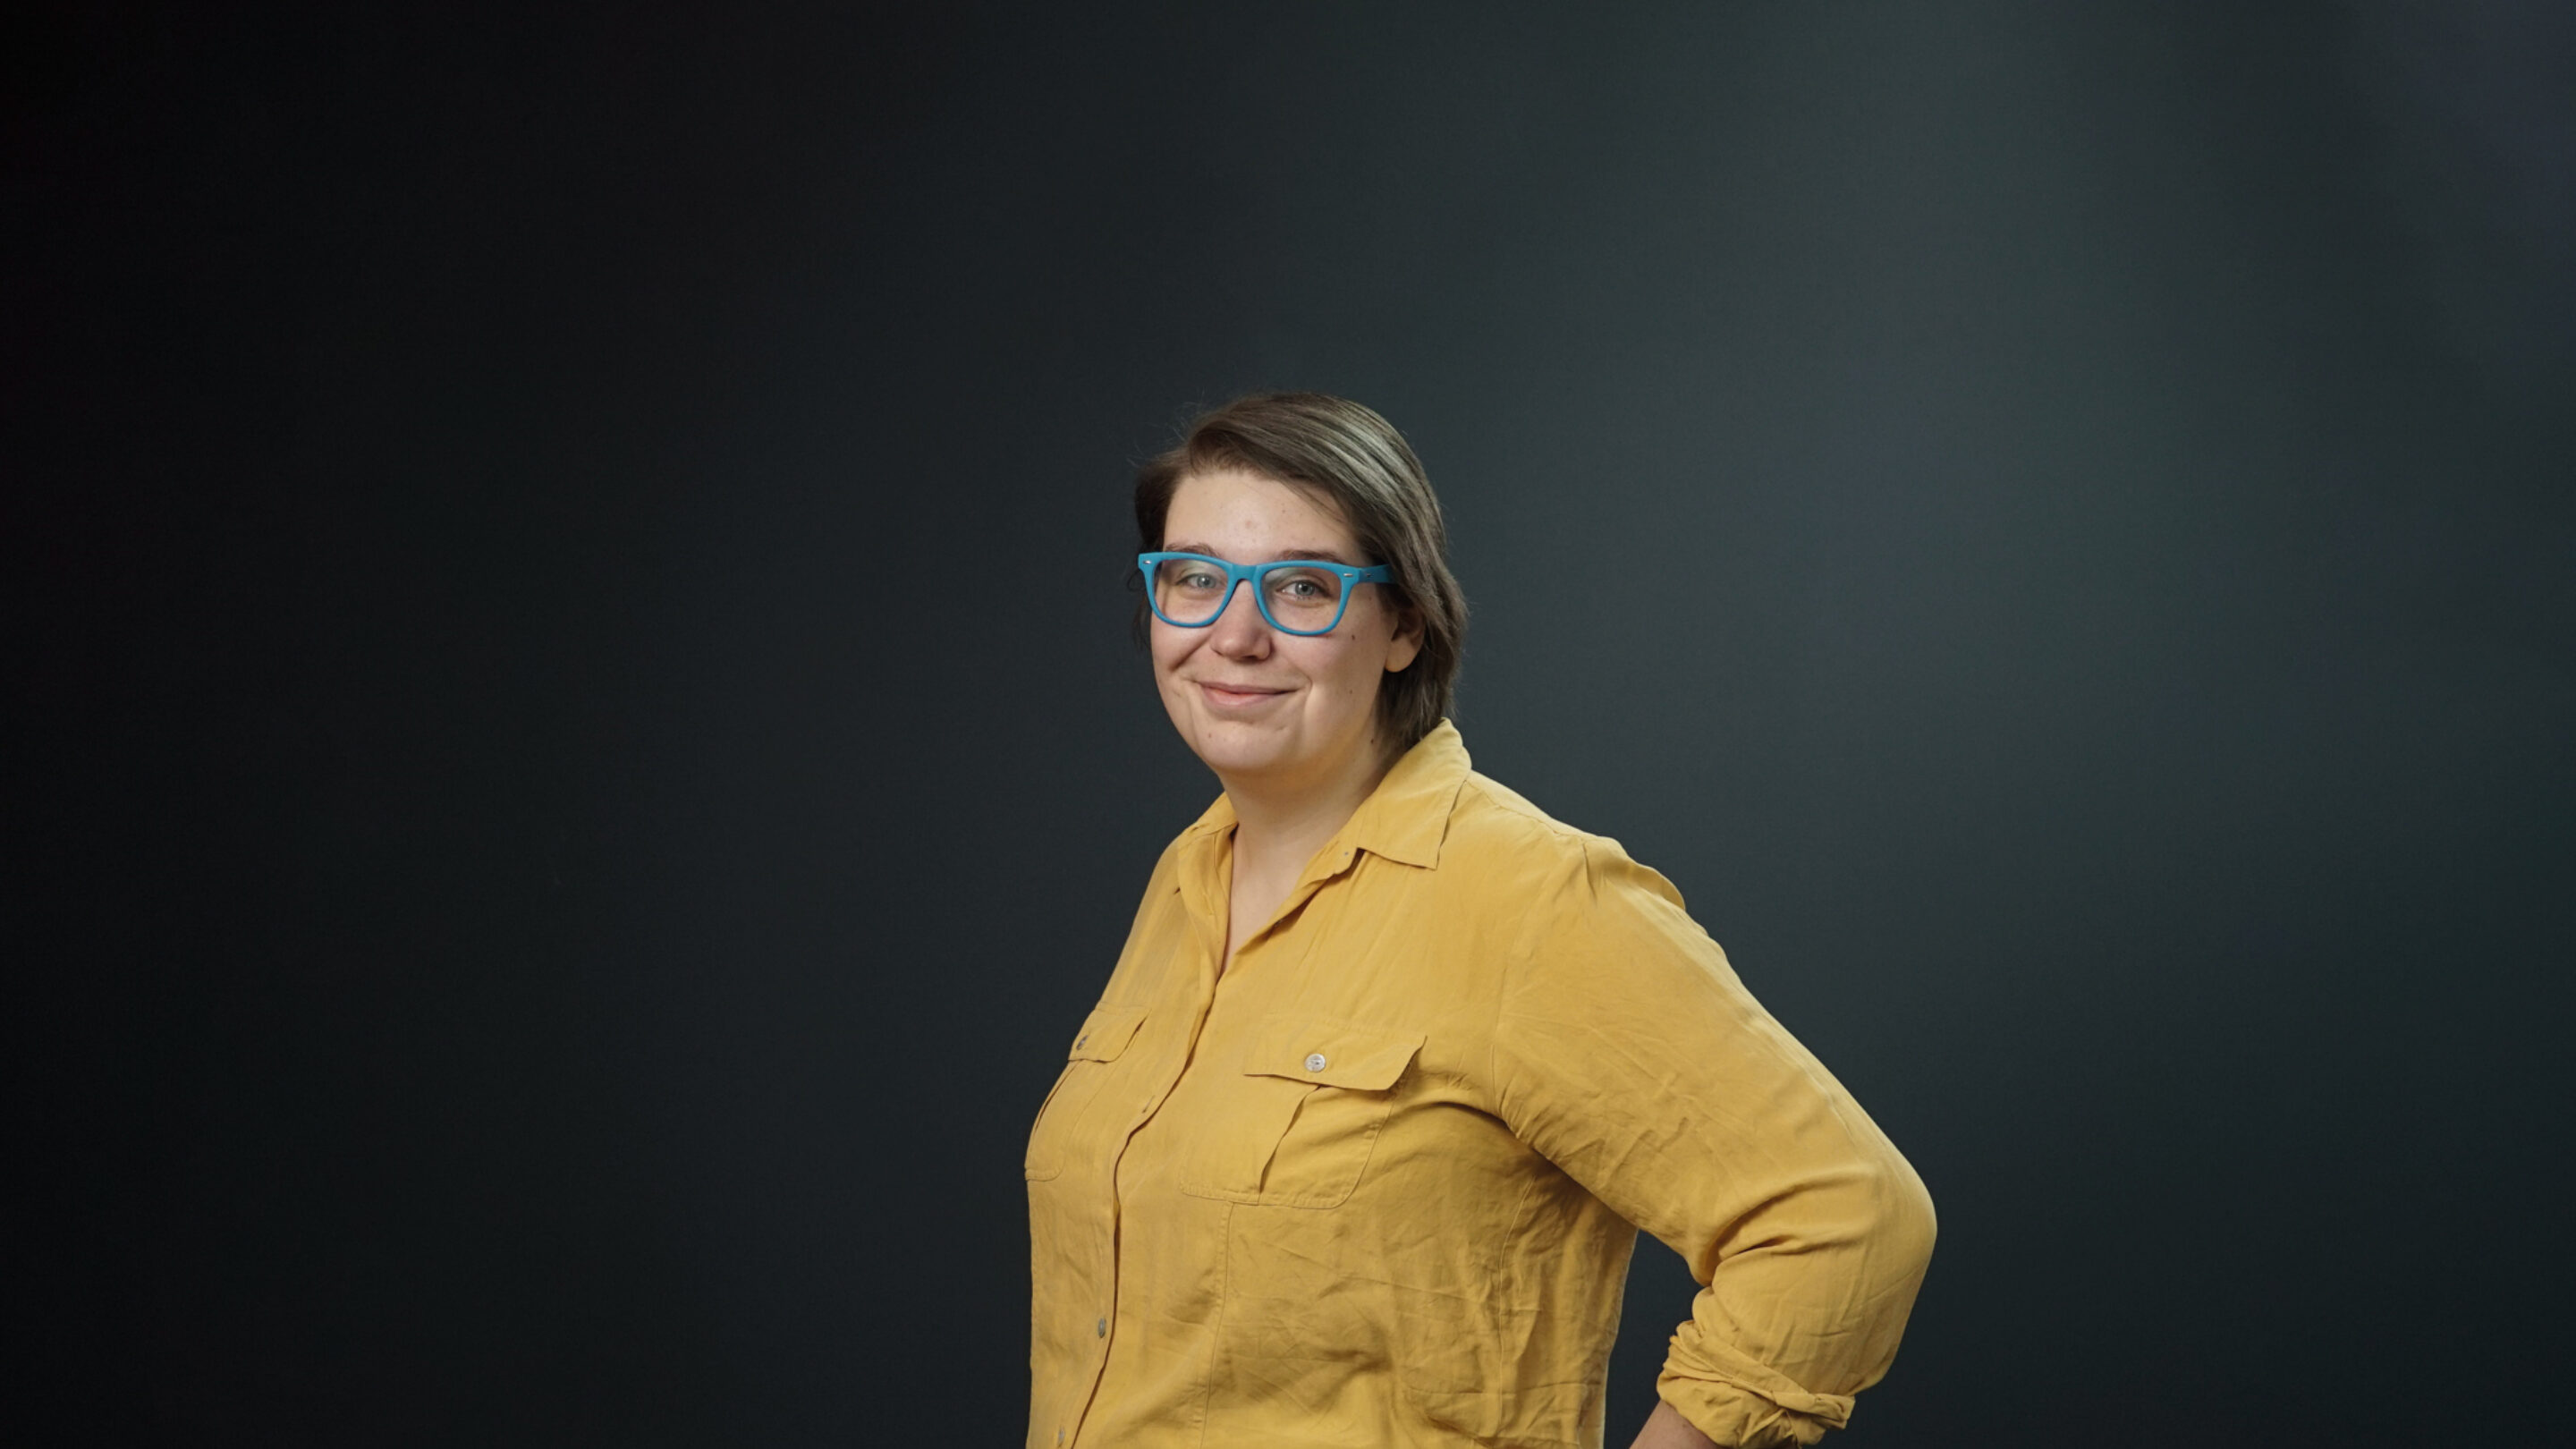 Young woman stood sideways looking towards the camera wearing bright blue glasses.